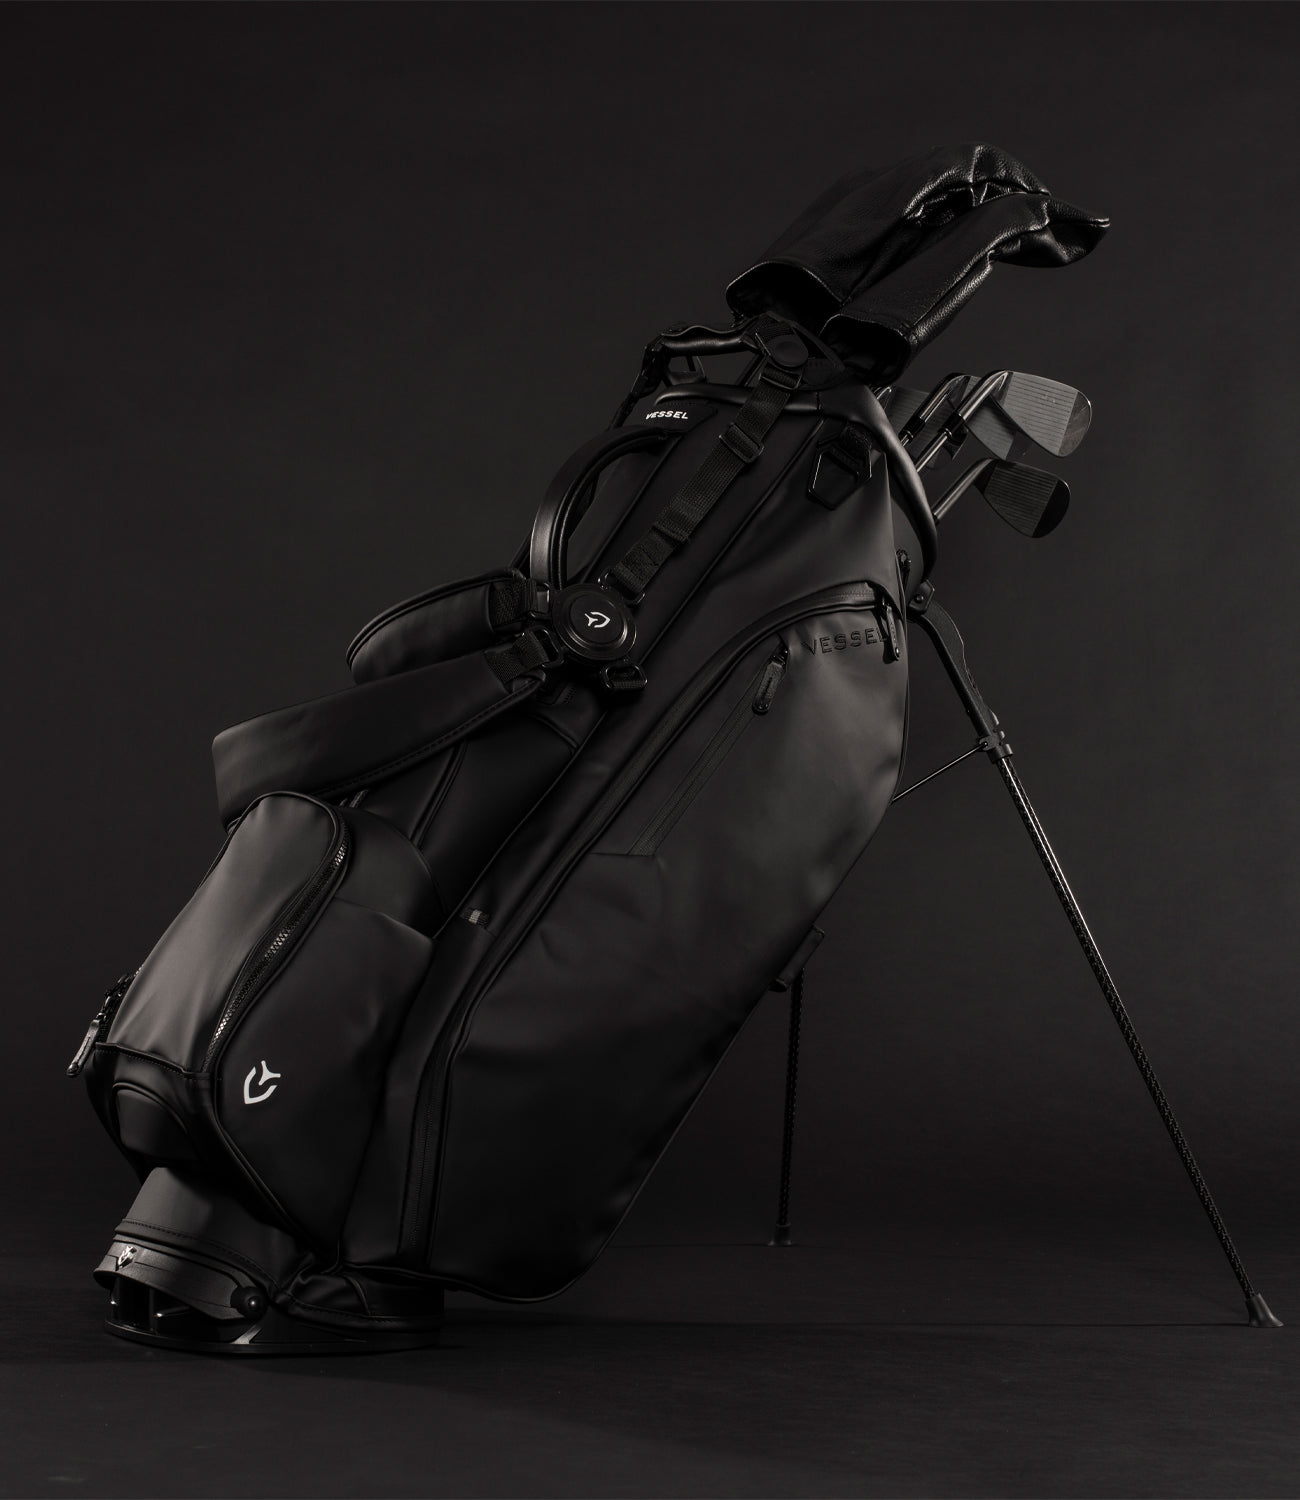 Black golf stand bag with golf clubs with headcovers in black studio